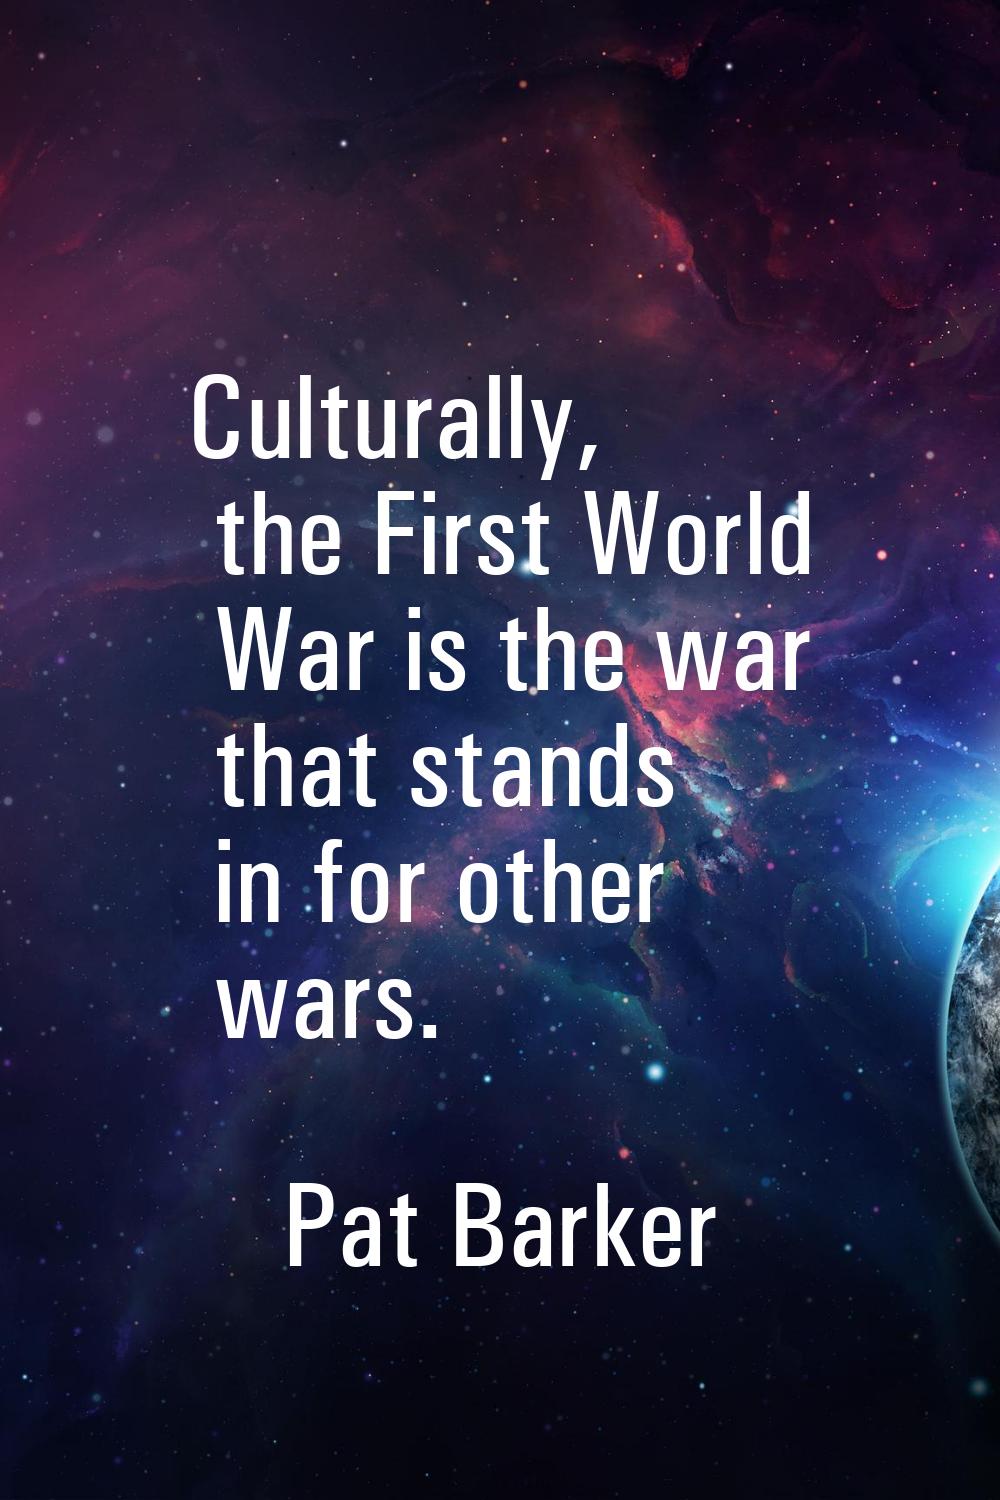 Culturally, the First World War is the war that stands in for other wars.